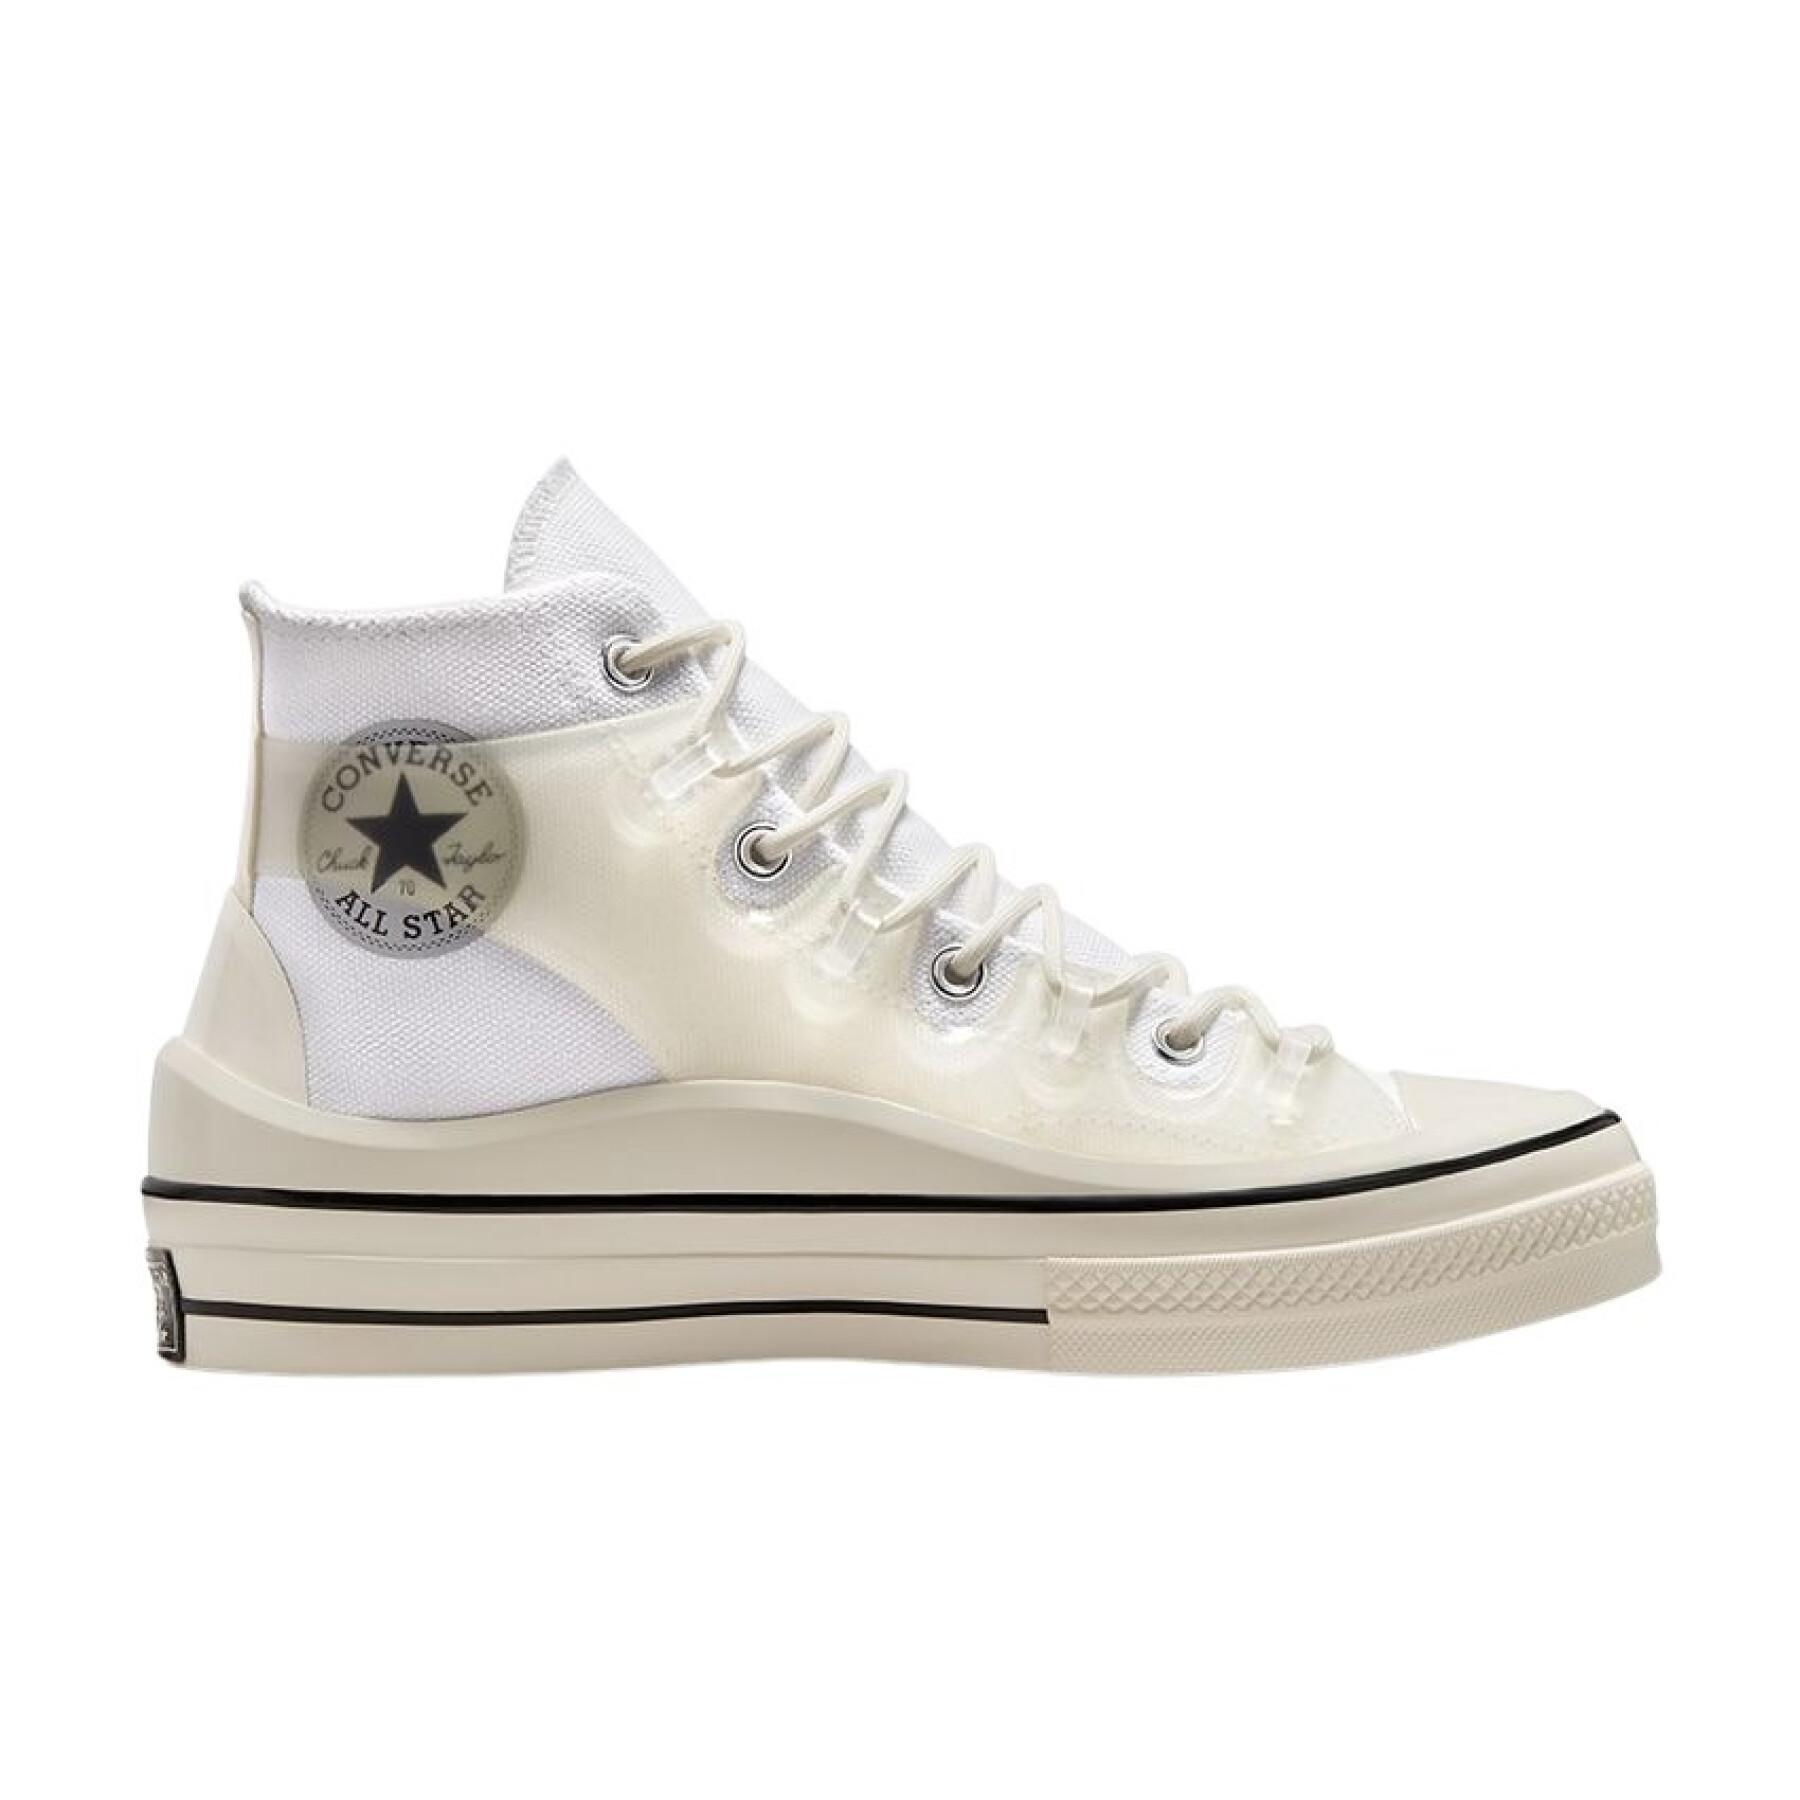 Trainers Converse Street Utility Chuck 70 Utility